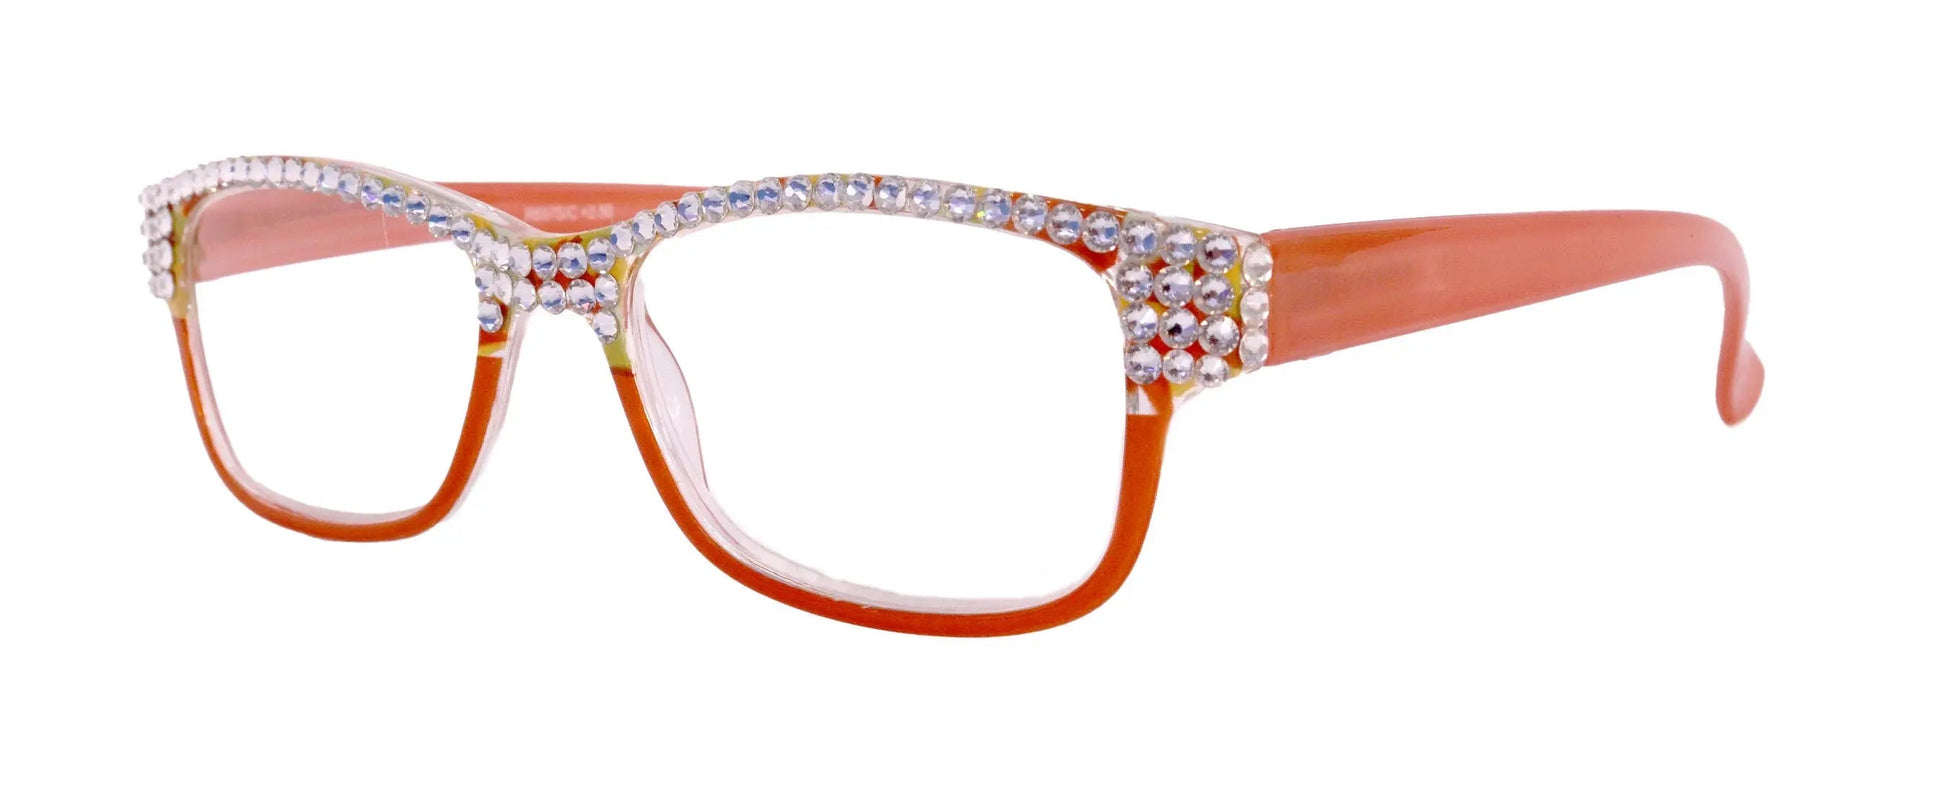 Olivia, (Bling) Women Reading Glasses Adorned with (Full Top) (Clear) Genuine European Crystals.  (Orange) Square, NY fifth avenue. 